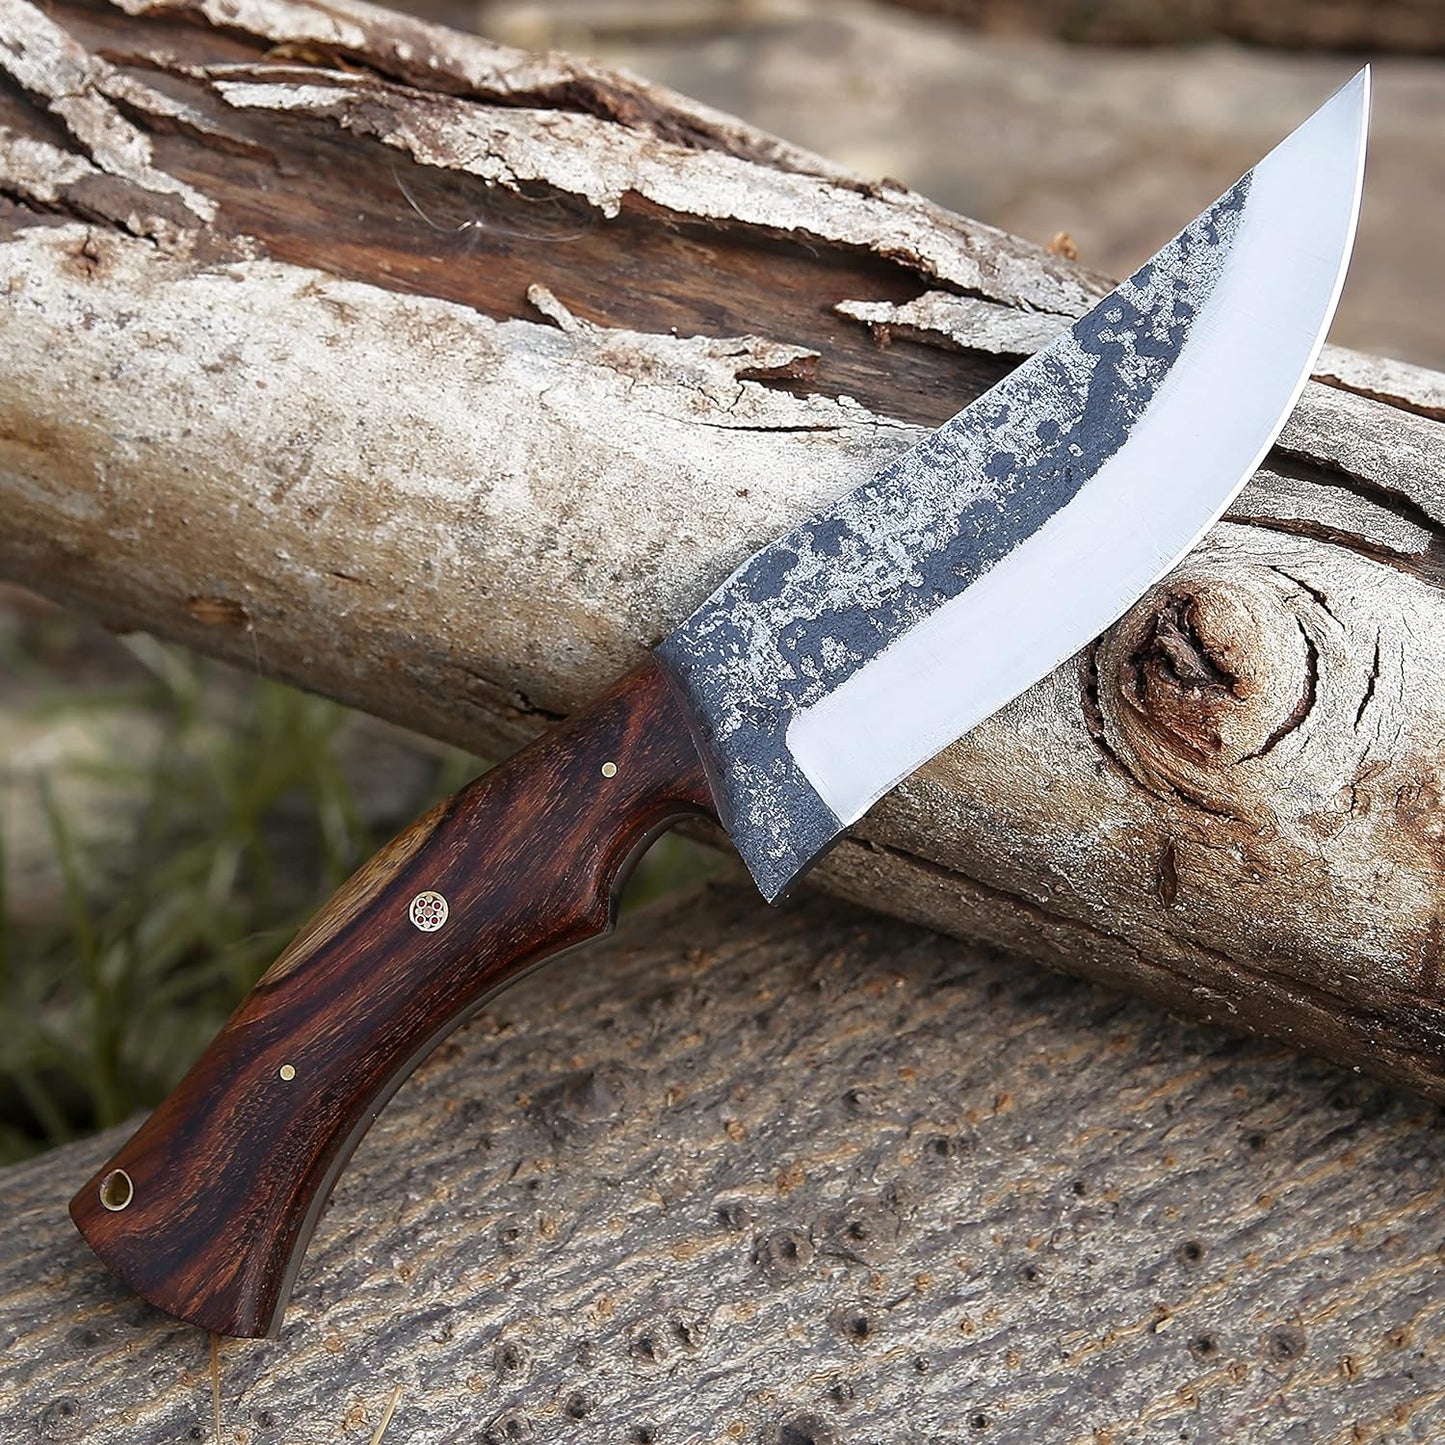 KD High Carbon Steel Hunting Bushcraft Knife with Leather Sheath